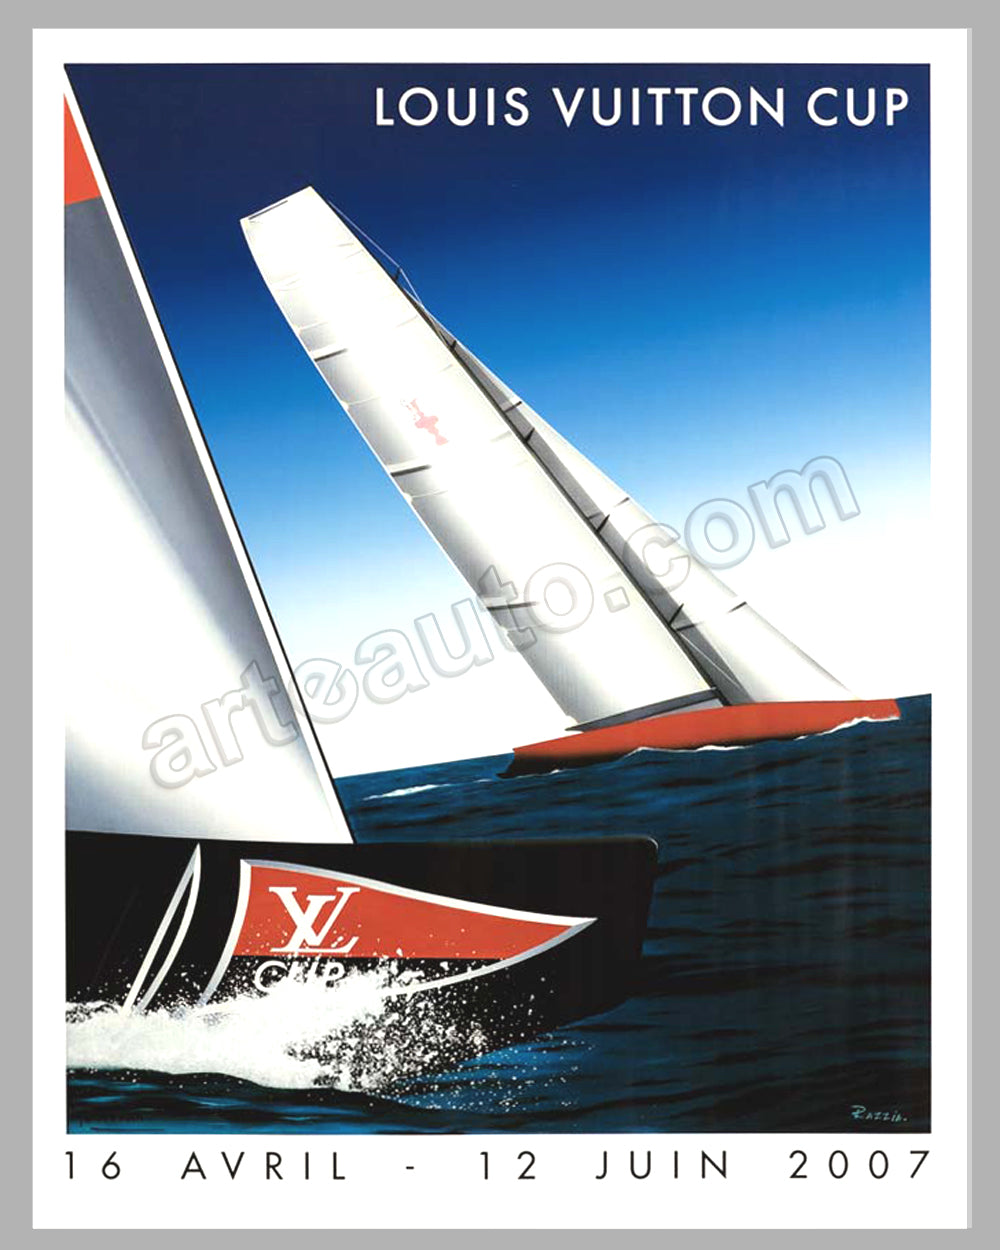 Louis Vuitton Cup, Advertising Posters